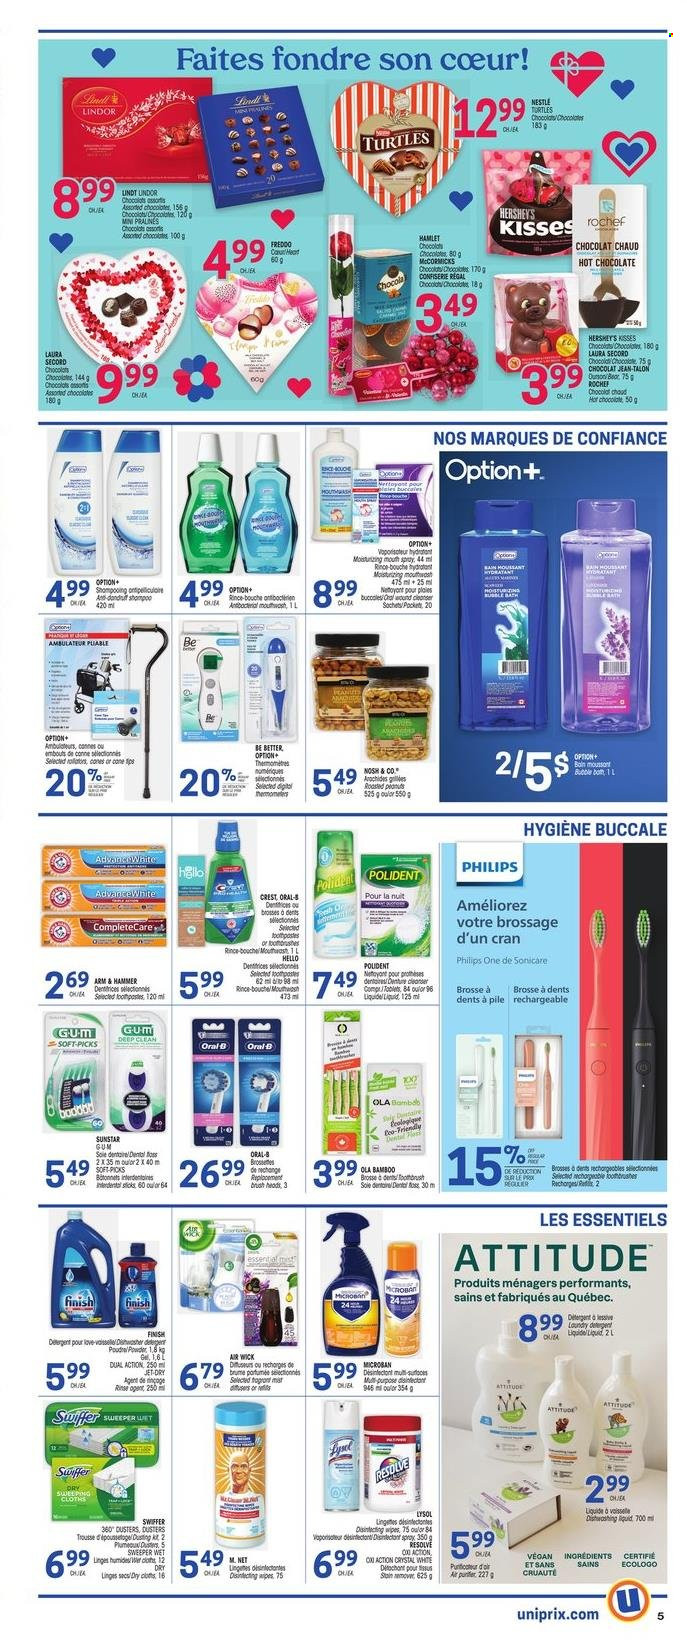 thumbnail - Uniprix Flyer - January 26, 2023 - February 01, 2023 - Sales products - Hershey's, ARM & HAMMER, roasted peanuts, peanuts, hot chocolate, wipes, Lysol, Swiffer, laundry detergent, dishwashing liquid, bubble bath, toothbrush, mouthwash, Polident, Crest, detergent, Nestlé, shampoo, pralines, Oral-B, Lindor, desinfection. Page 6.